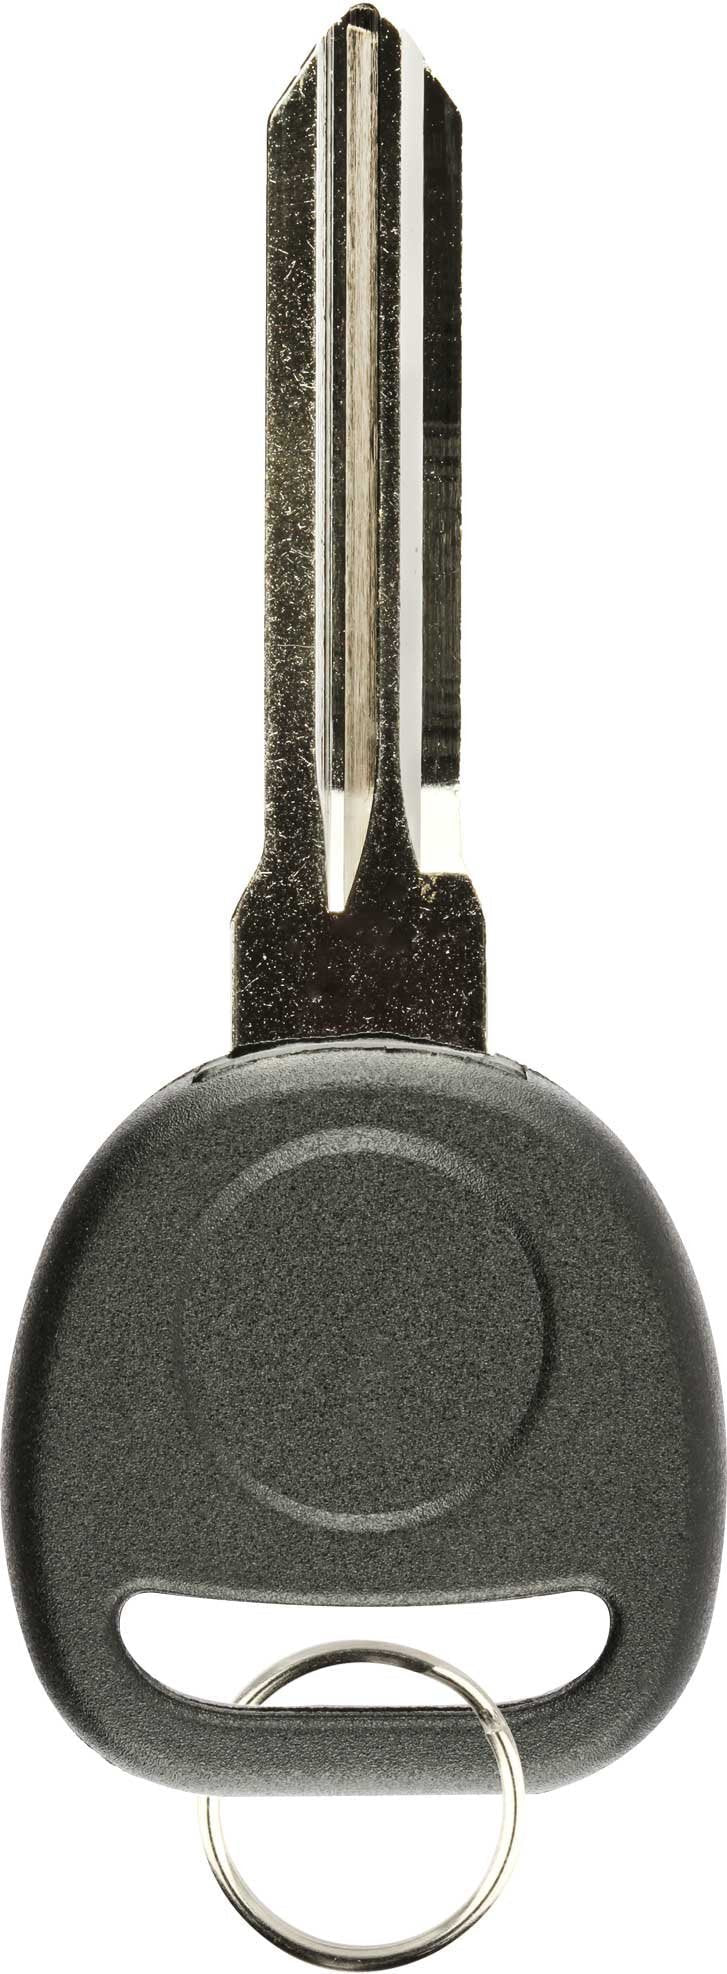  [AUSTRALIA] - Keylessoption Key Replacement Uncut Transponder Chip Chipped Blank Ignition for Circle Plus